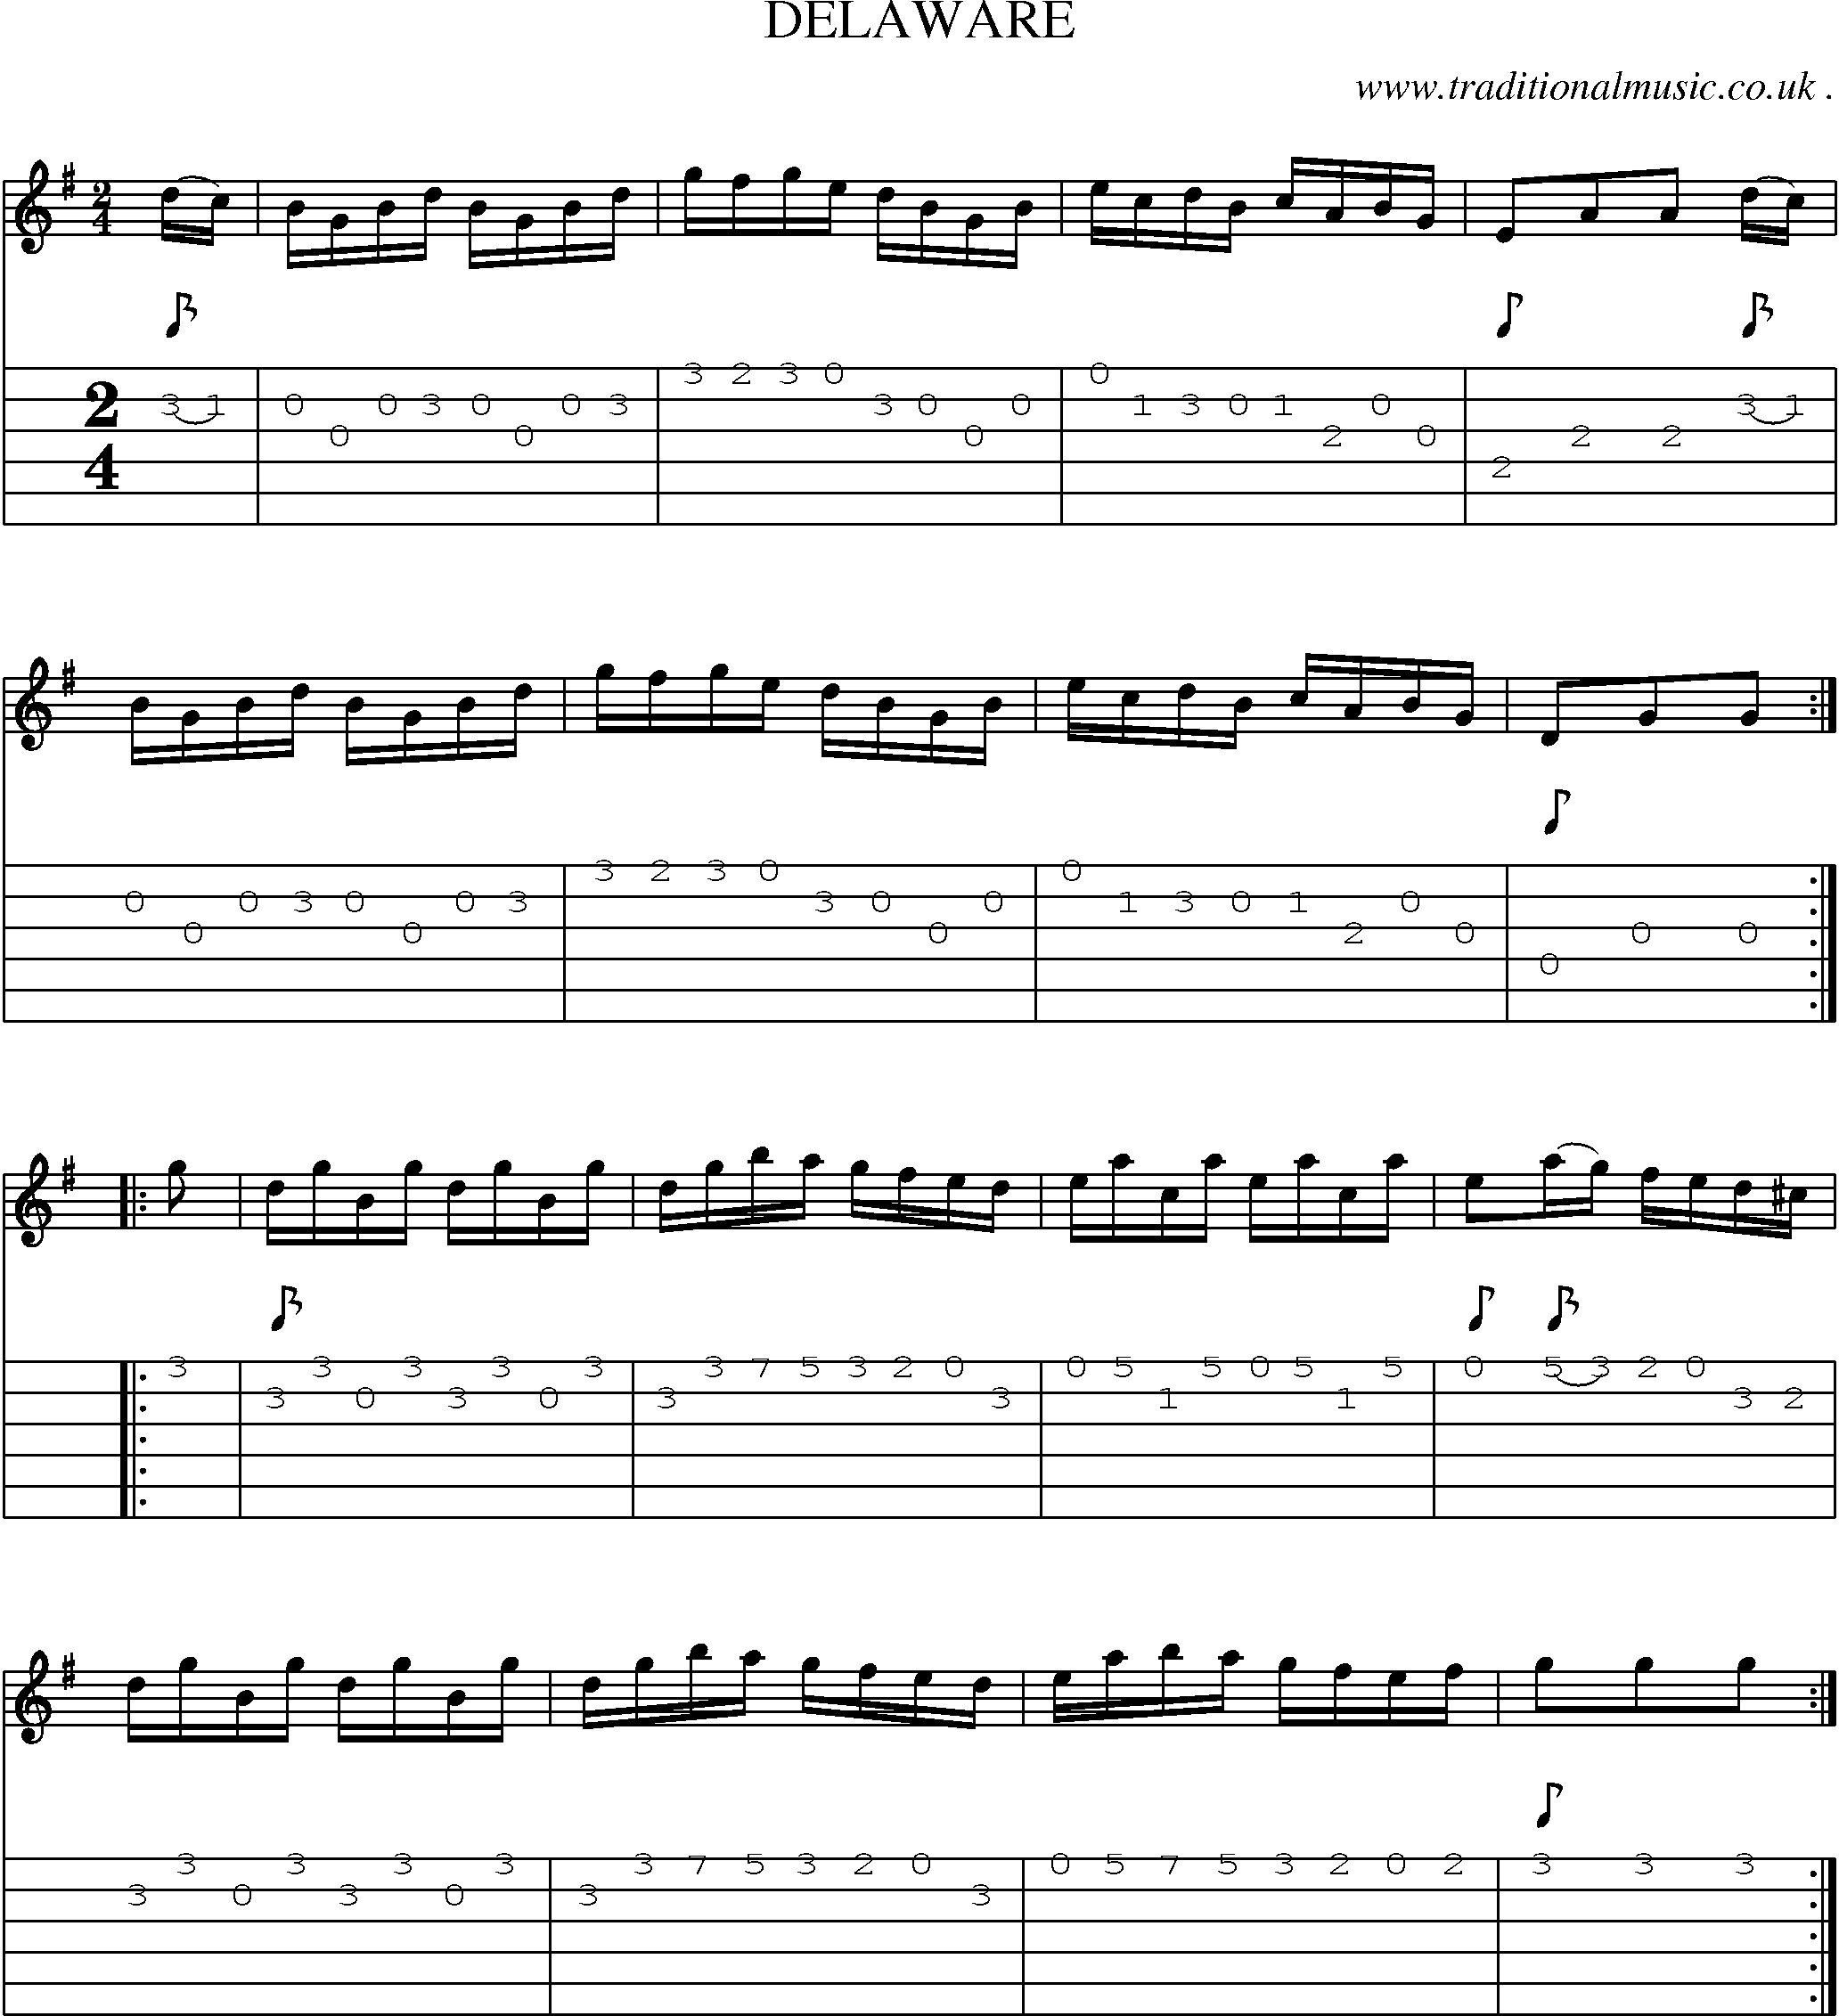 Sheet-Music and Guitar Tabs for Delaware